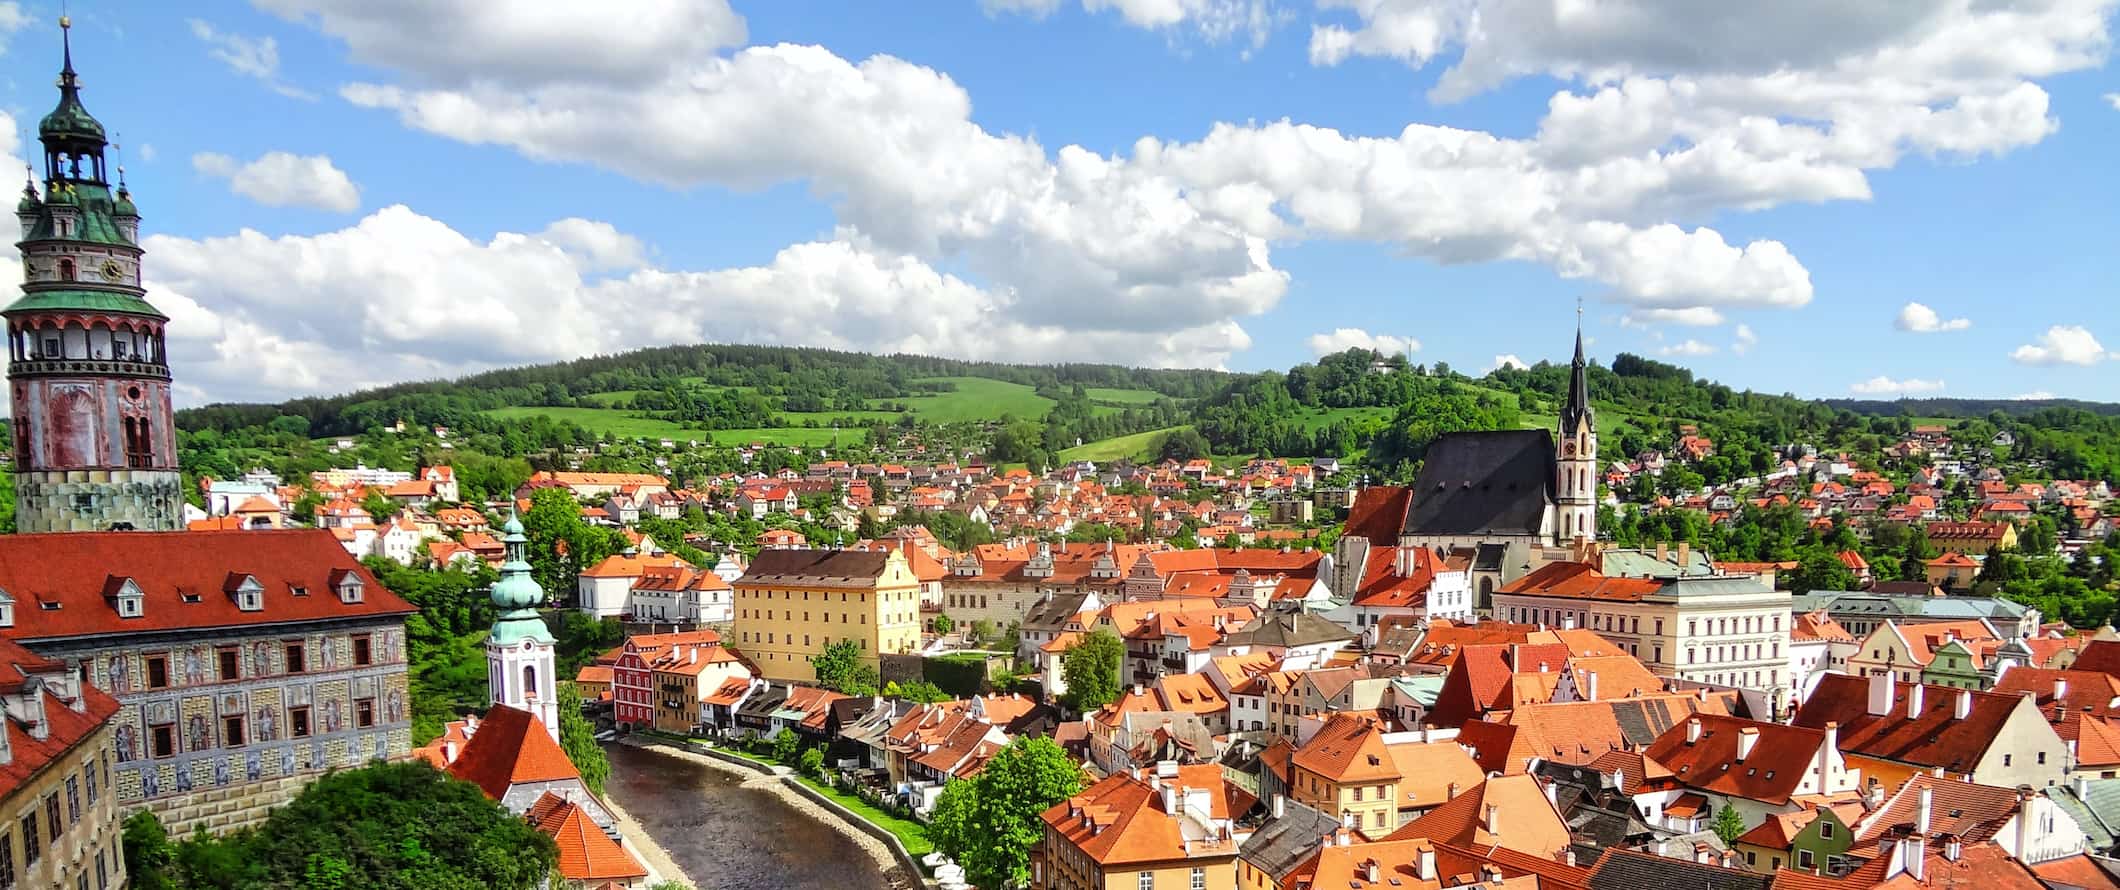 A scenic view over the rooftops in Cesky Krumlov on a sunny day in Czechia